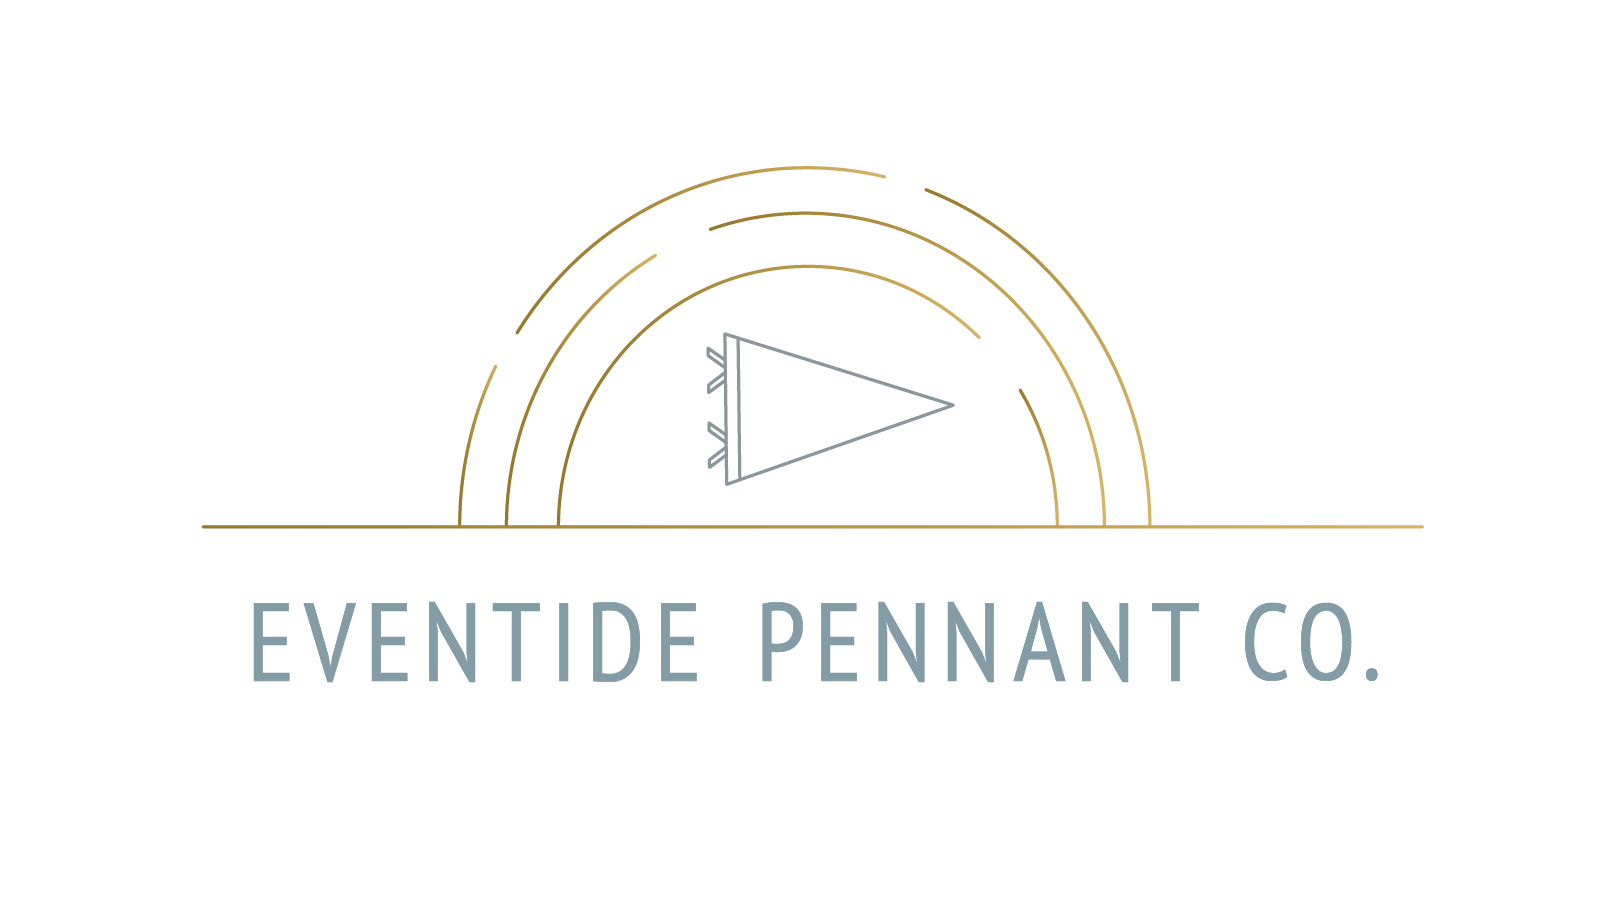 Eventide Pennant Co. Gift Card - Eventide Pennant Co.